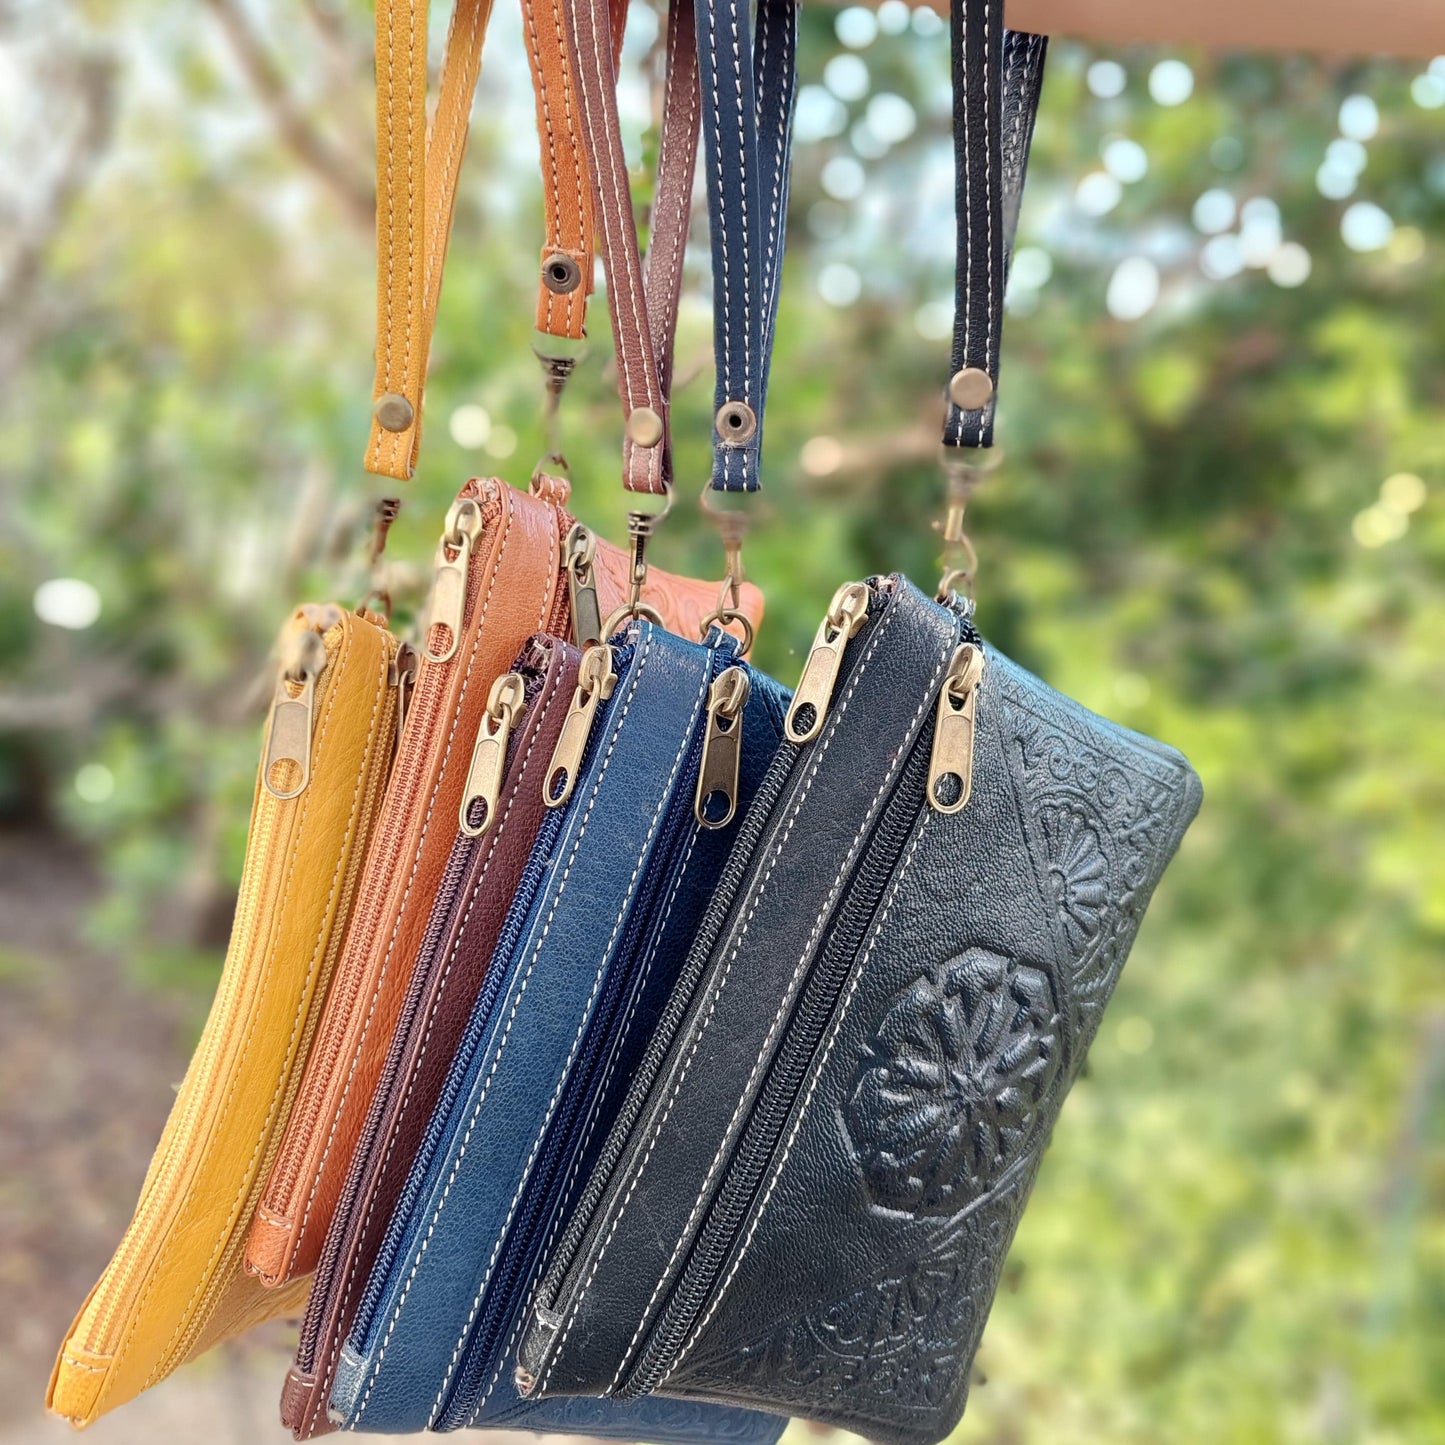 Moroccan Leather wristlets | removable wrist strap | embossed design on front | handmade | Camel leather | 